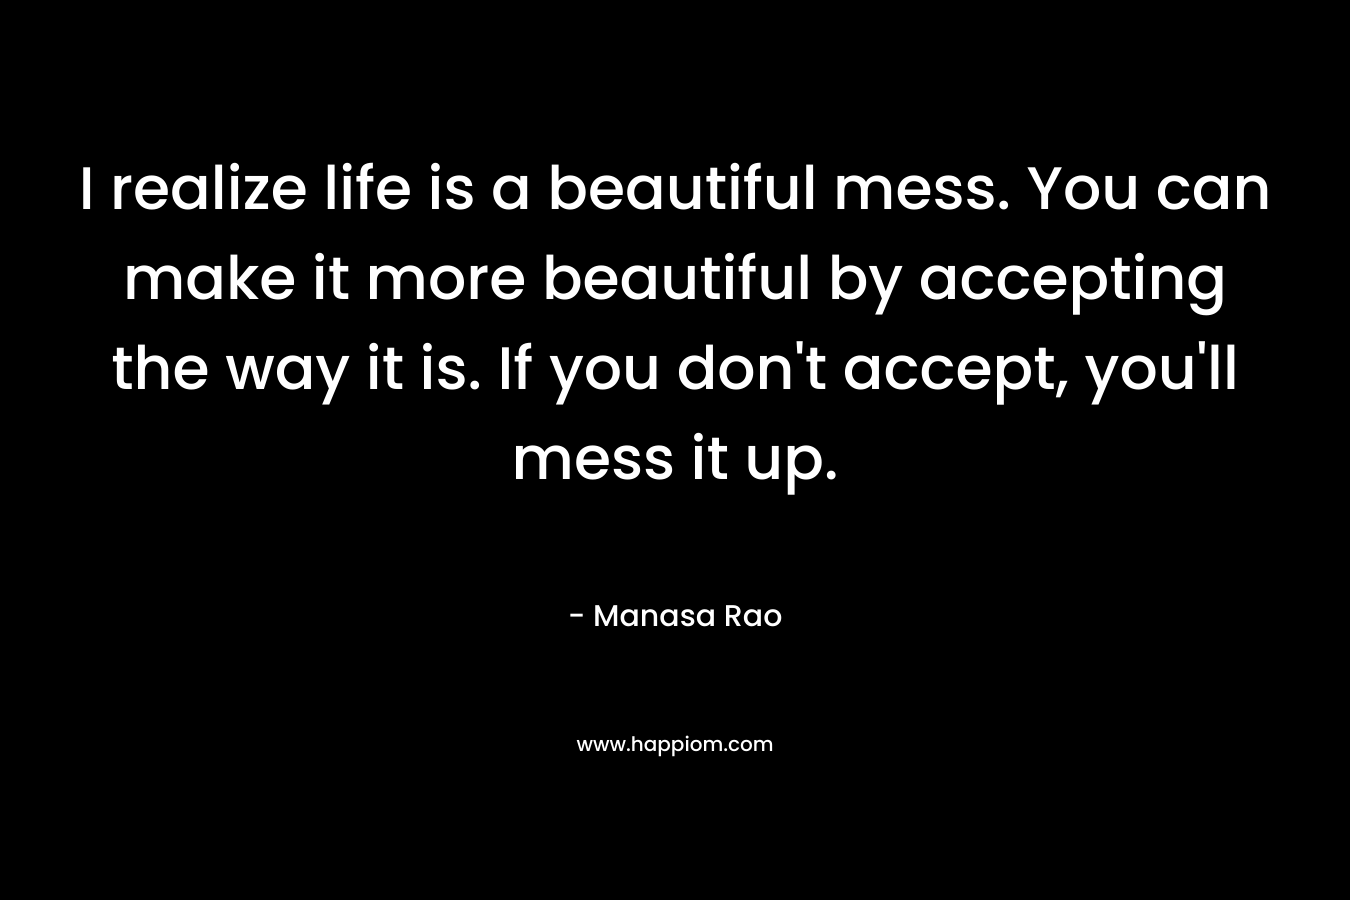 I realize life is a beautiful mess. You can make it more beautiful by accepting the way it is. If you don’t accept, you’ll mess it up. – Manasa Rao